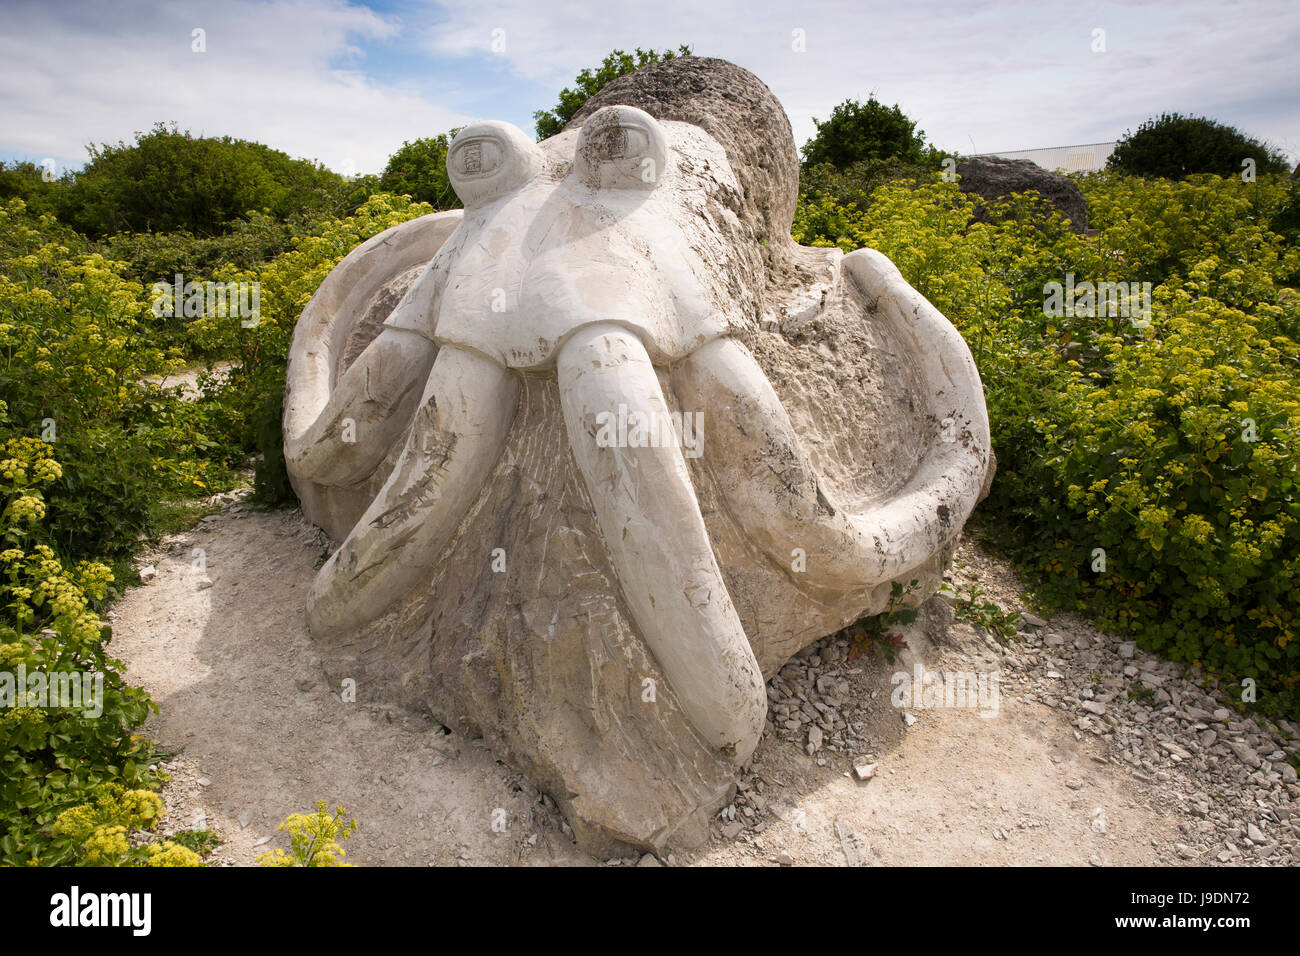 UK England, Dorset, Portland, Clay Ope, Tout Quarry Sculpture Park, octopus sculpted from stone Stock Photo